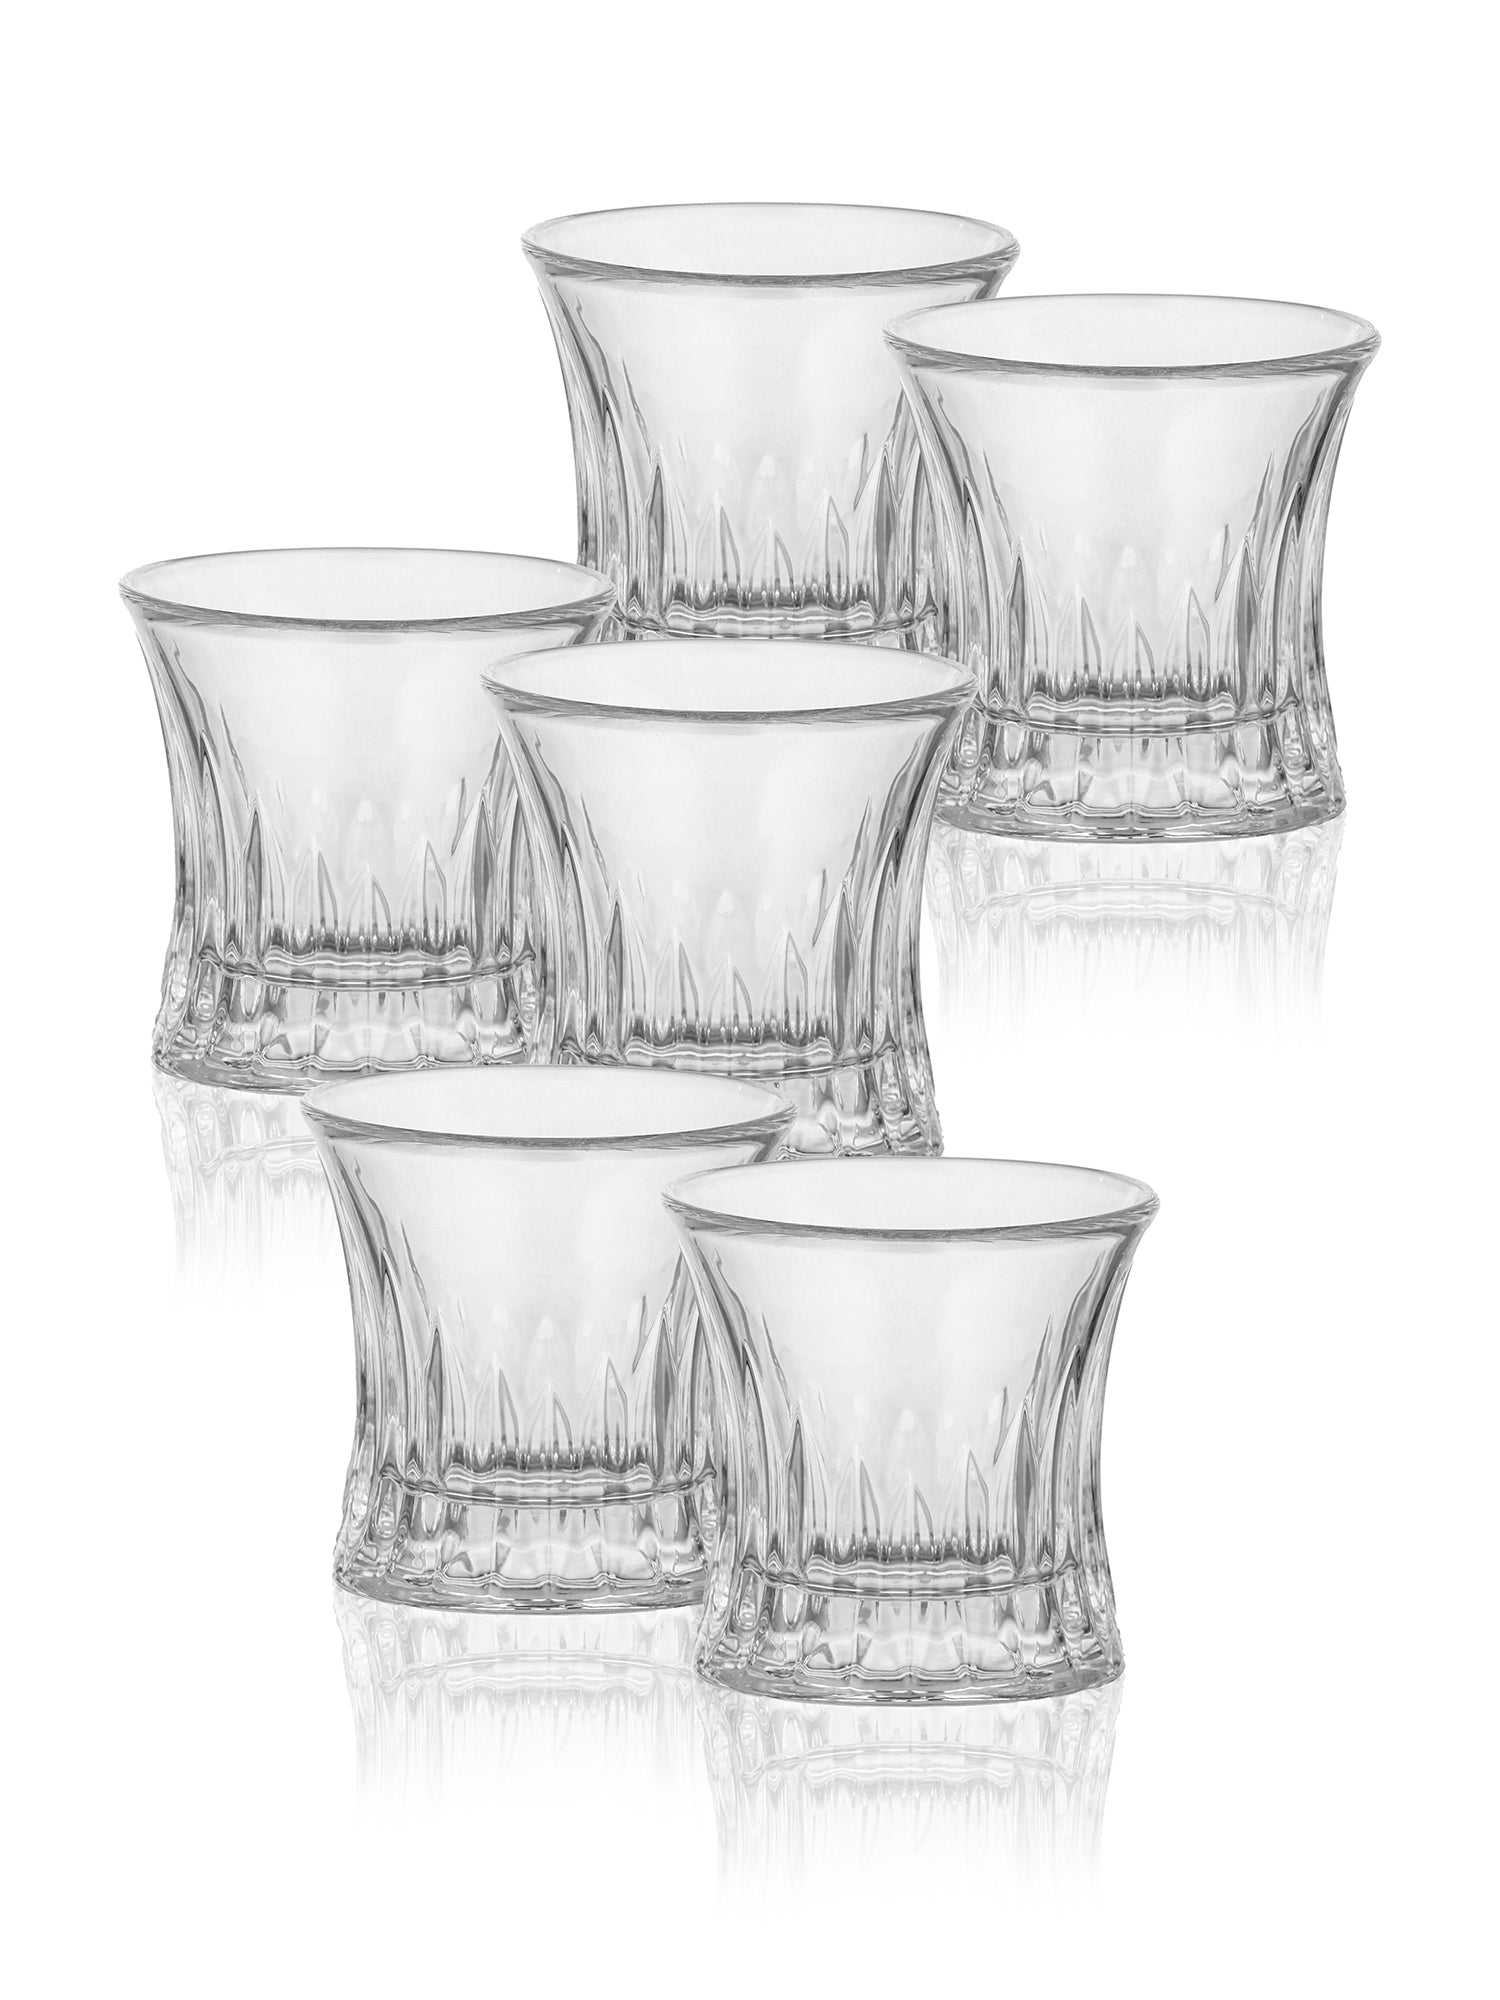 Oval Shaped Crystal old fashioned whiskey Glass |Set of 6